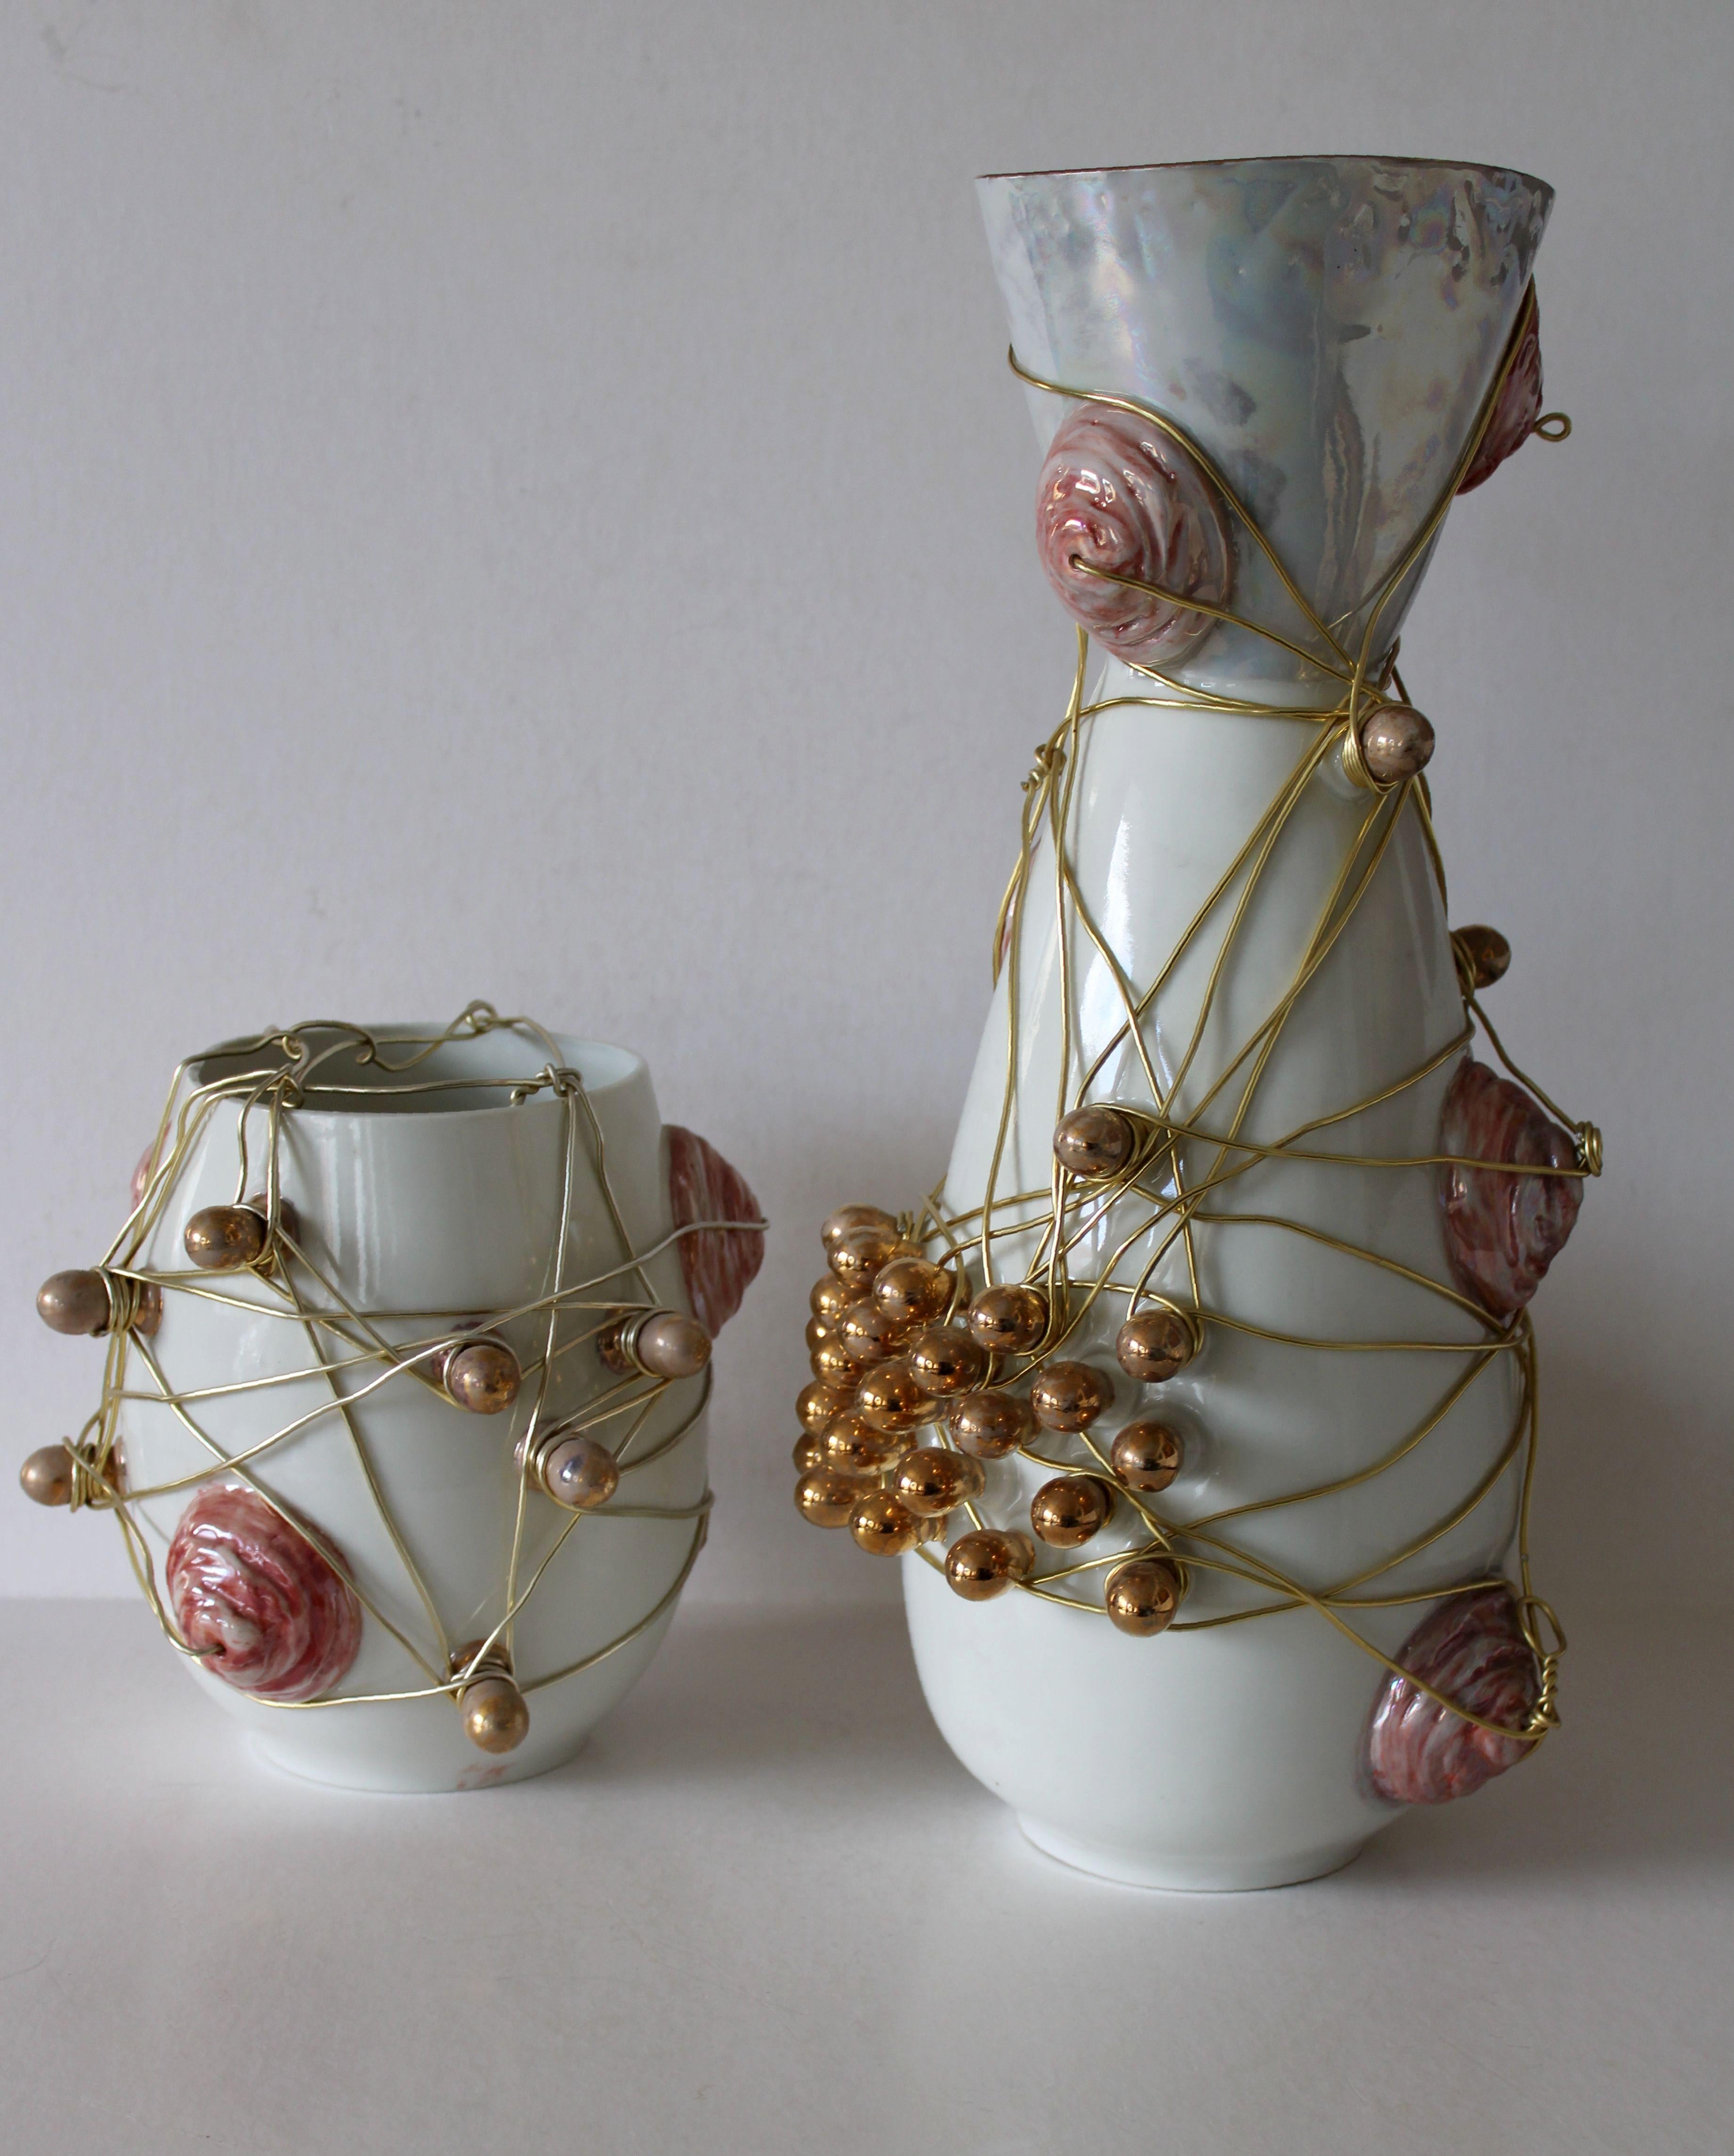 Vases with wires - set of two  2009, porcelain, wire, h 19.5 cm, h 43 cm - Sculpture by Inese Brants